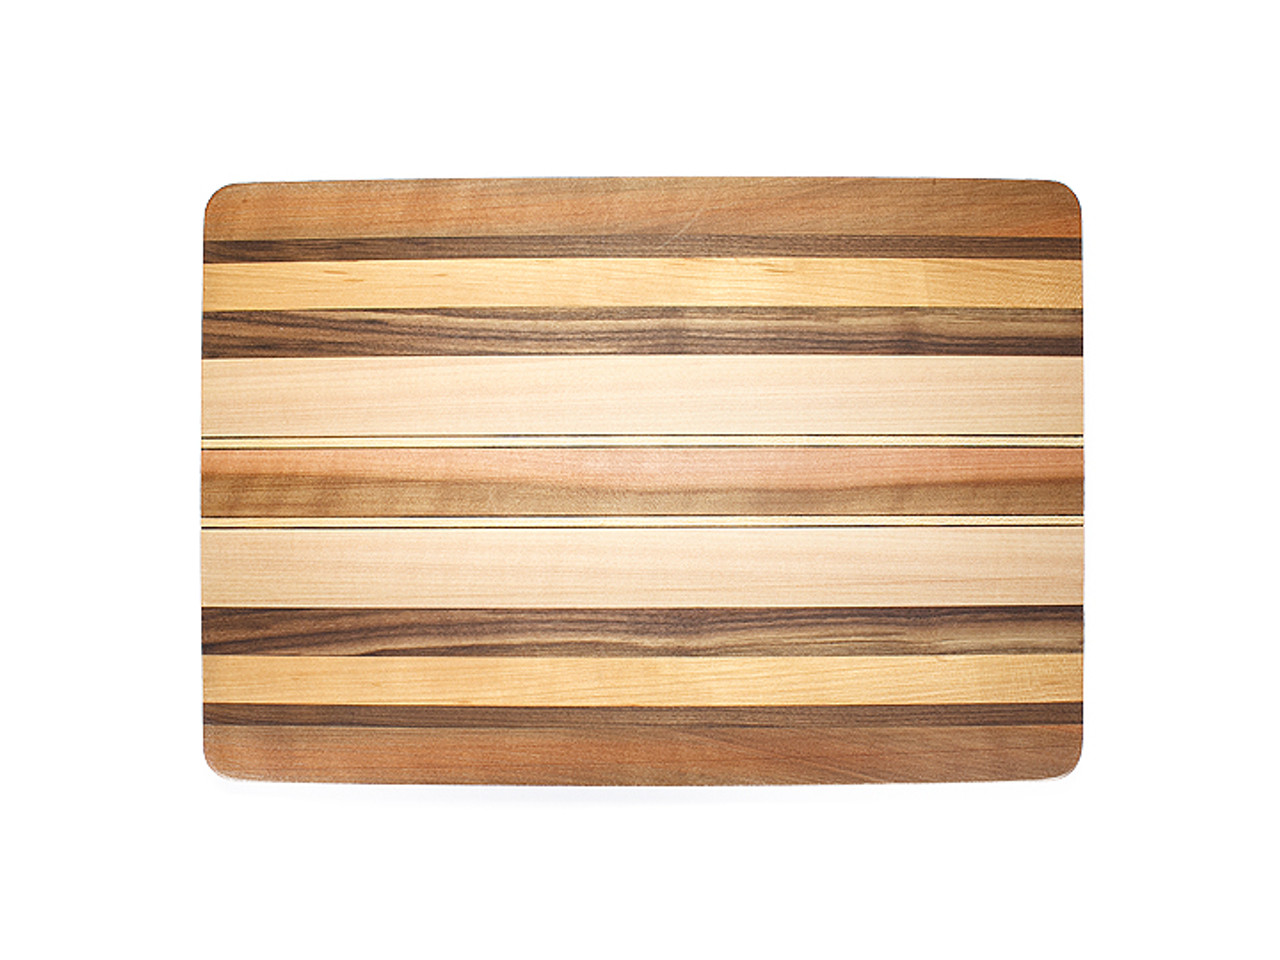 Bengston Woodworks Large Cutting Board 16 x 11 x 1.5